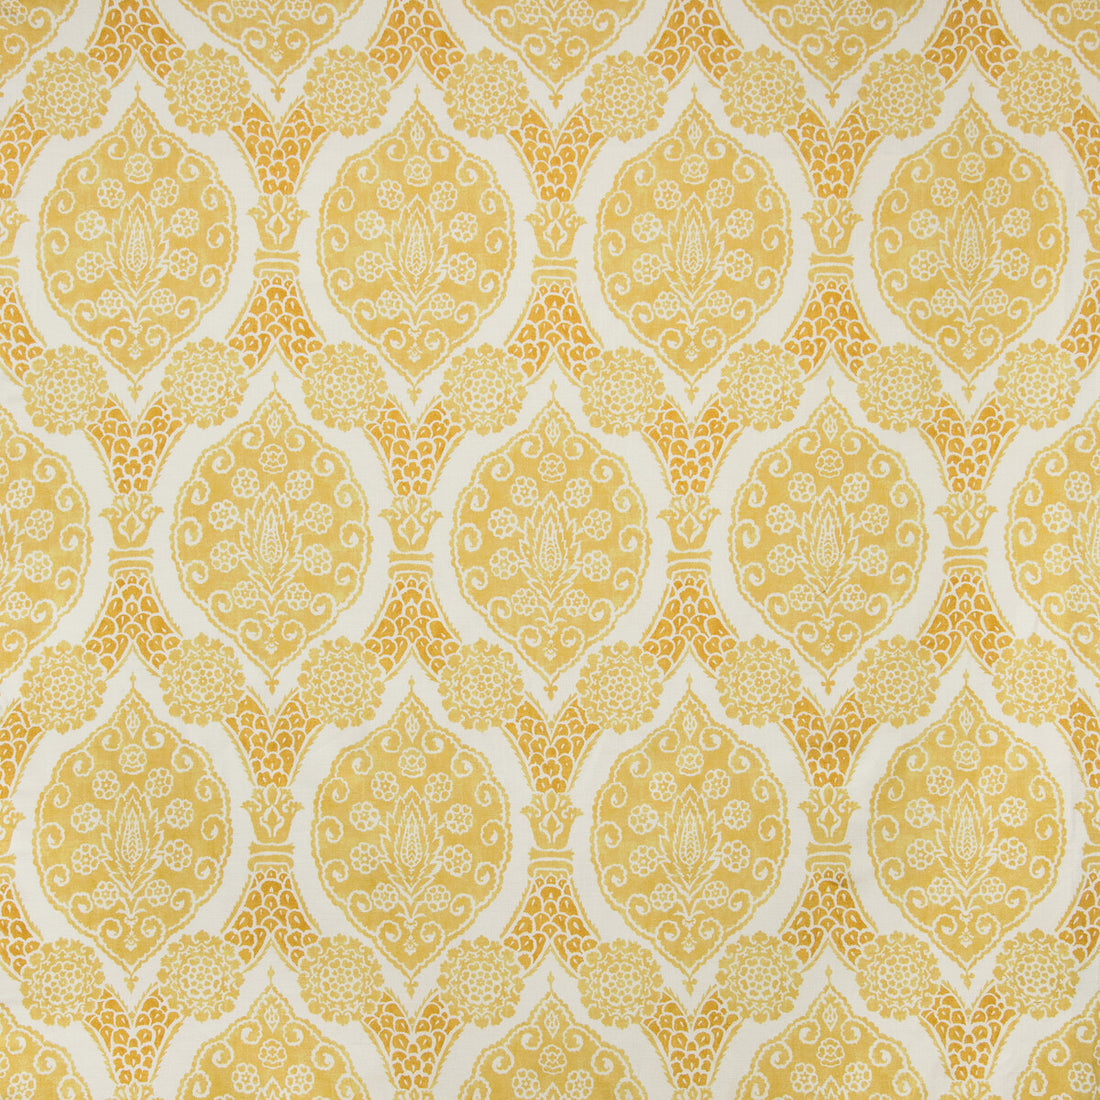 Sufera Print fabric in canary color - pattern 8020103.40.0 - by Brunschwig &amp; Fils in the Grand Bazaar collection